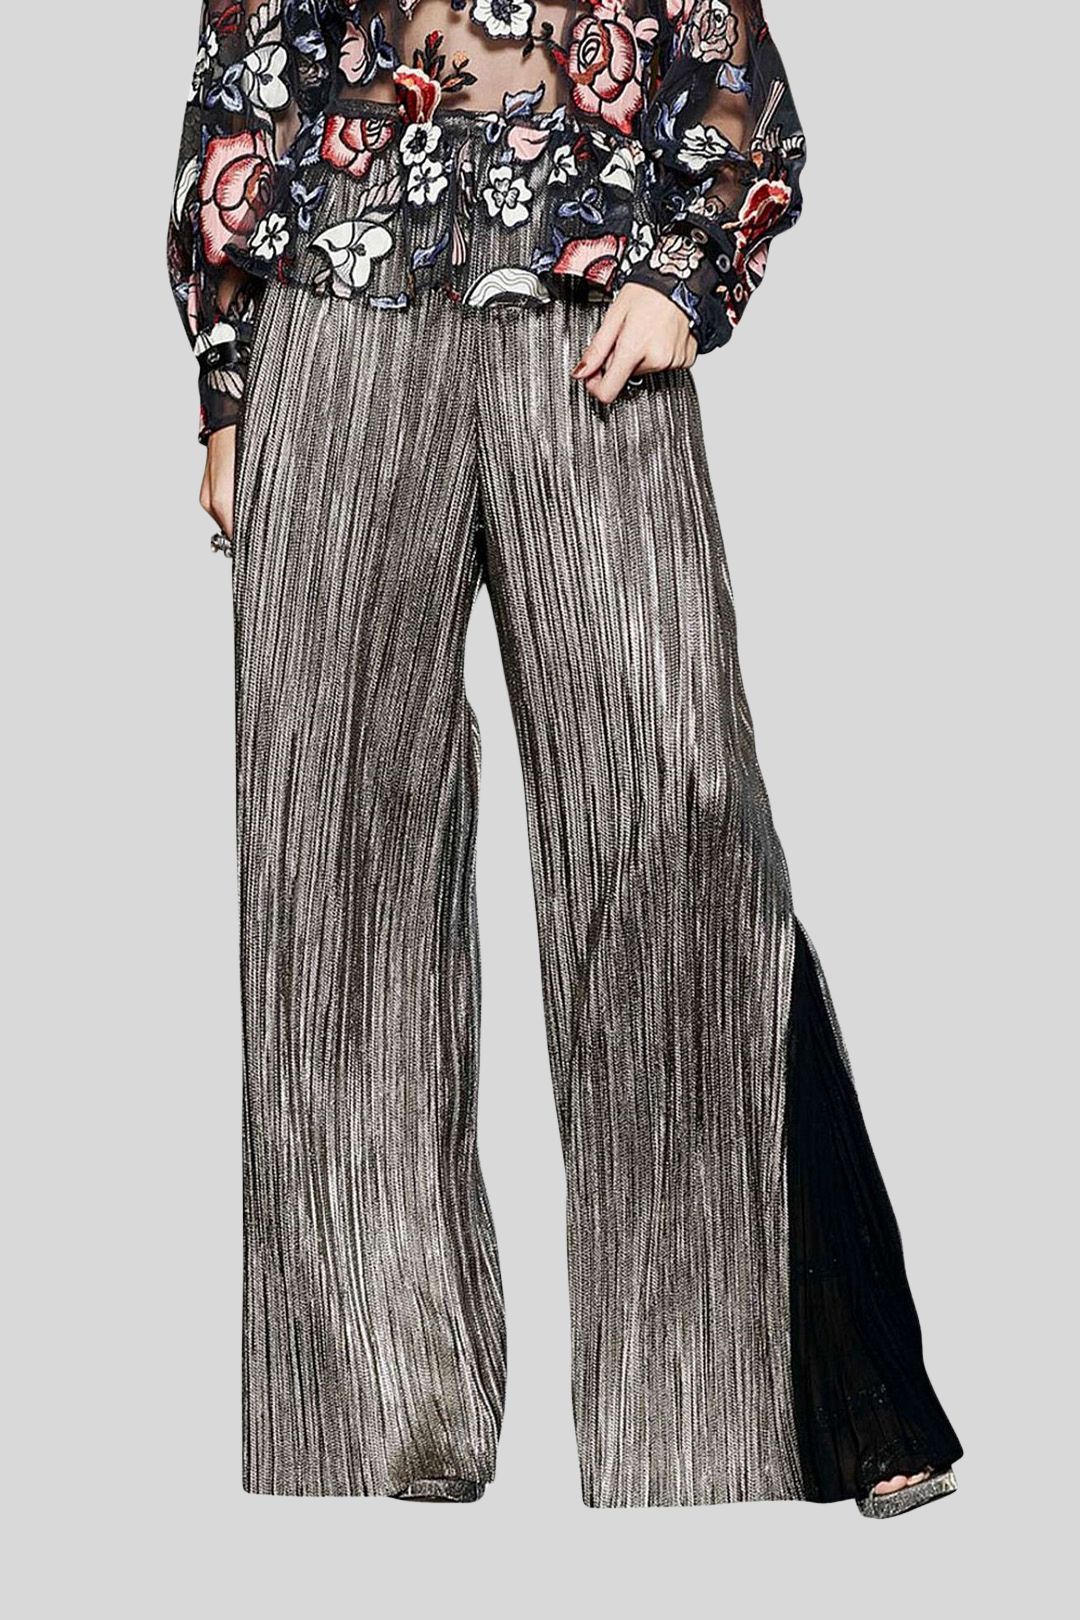 Shimmy' Pewter Metallic Pleated Trousers | Fashion, Fashion inspo outfits,  Office outfits women